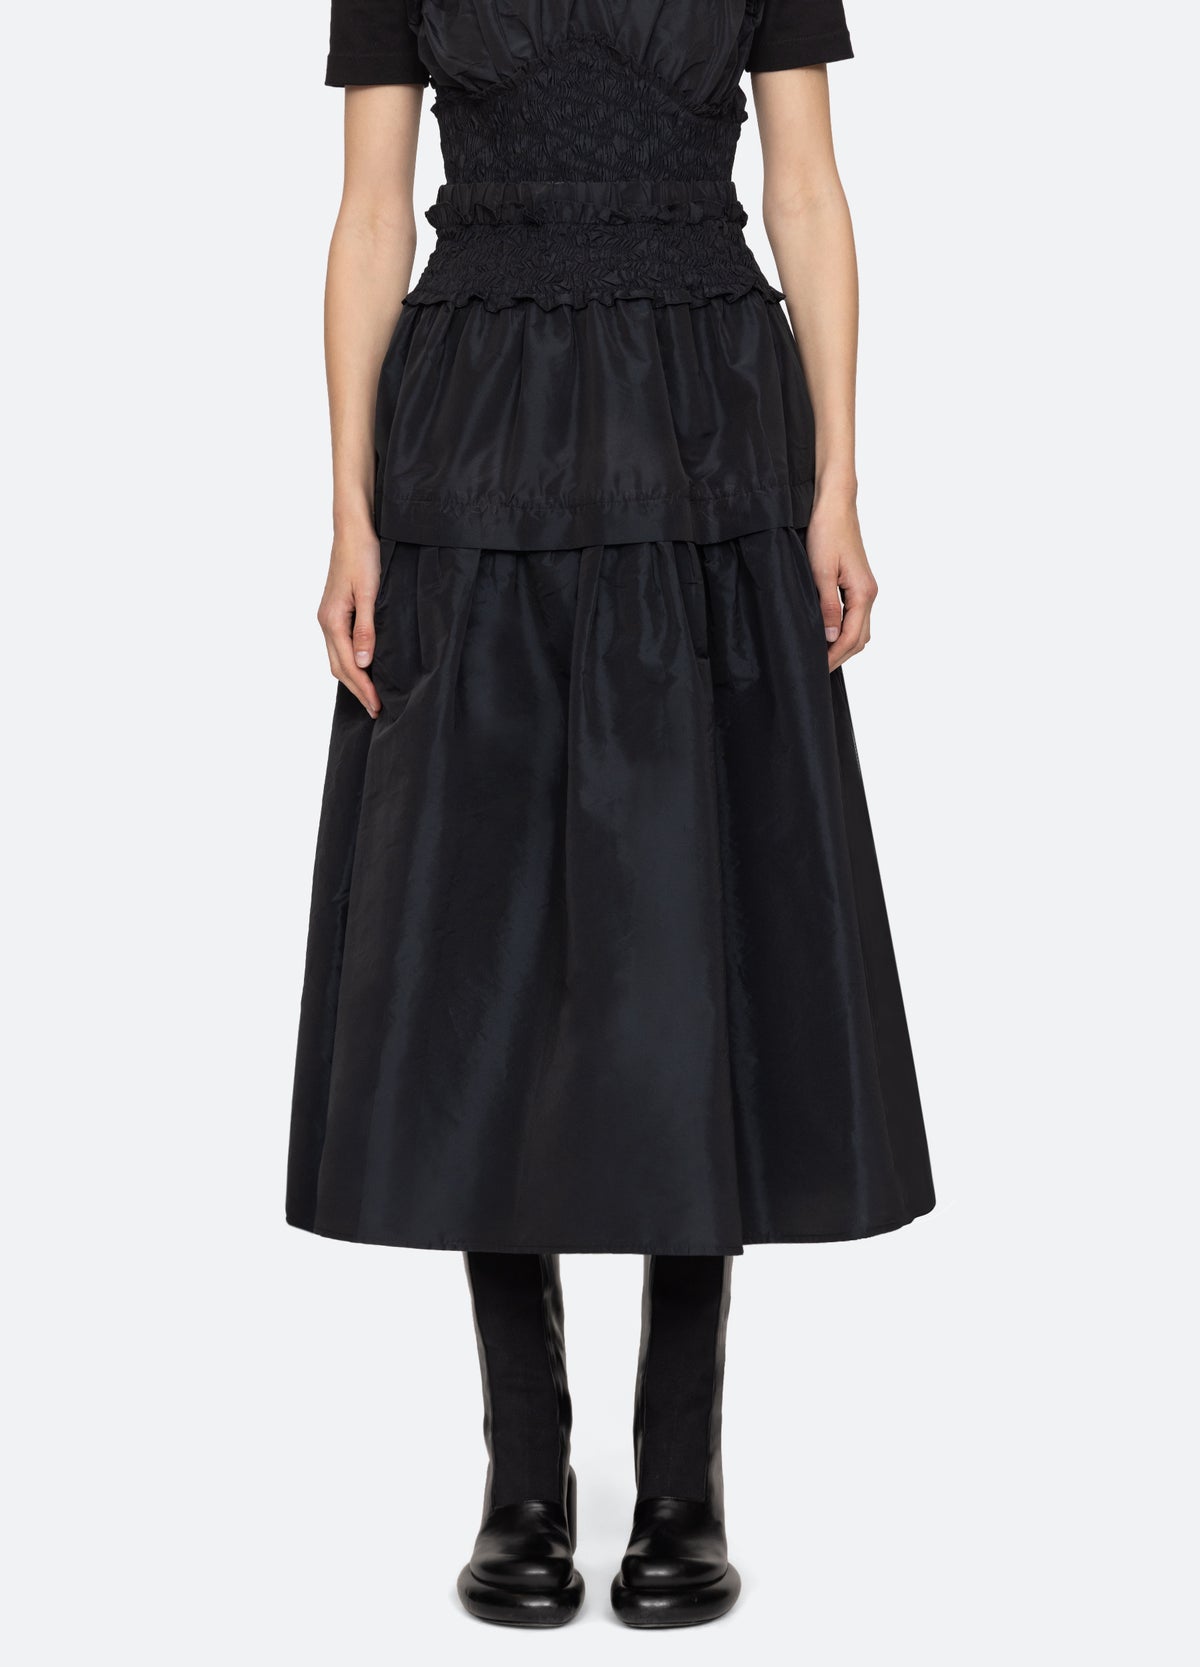 black-diana skirt-front view